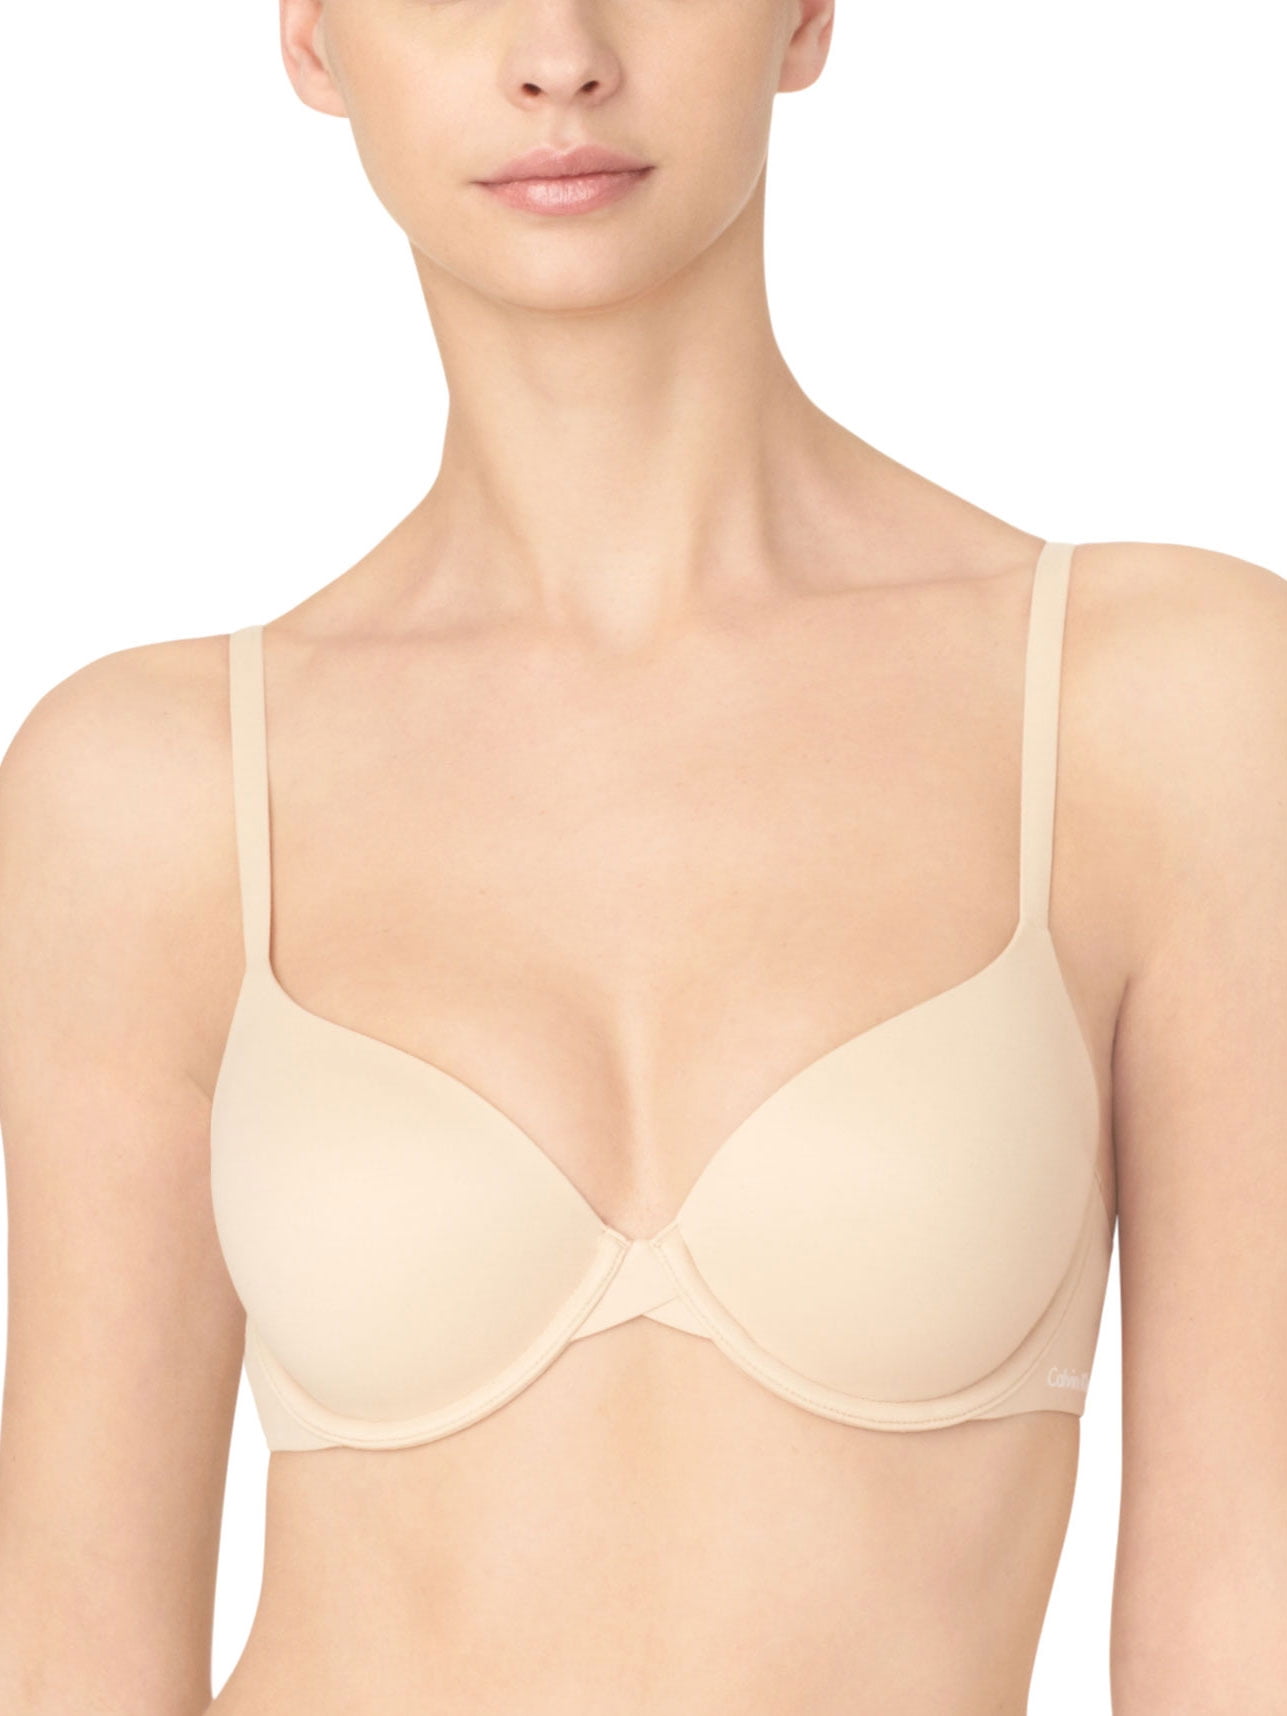 Underwire Bra Boutique - These sweet Calvin Klein bras are perfect for  summer! Unpadded smooth mesh cups allow for air flow on those hot days!  Available in 32A-34C $49 #calvinklein #cherrytreeboutique #sechelt #